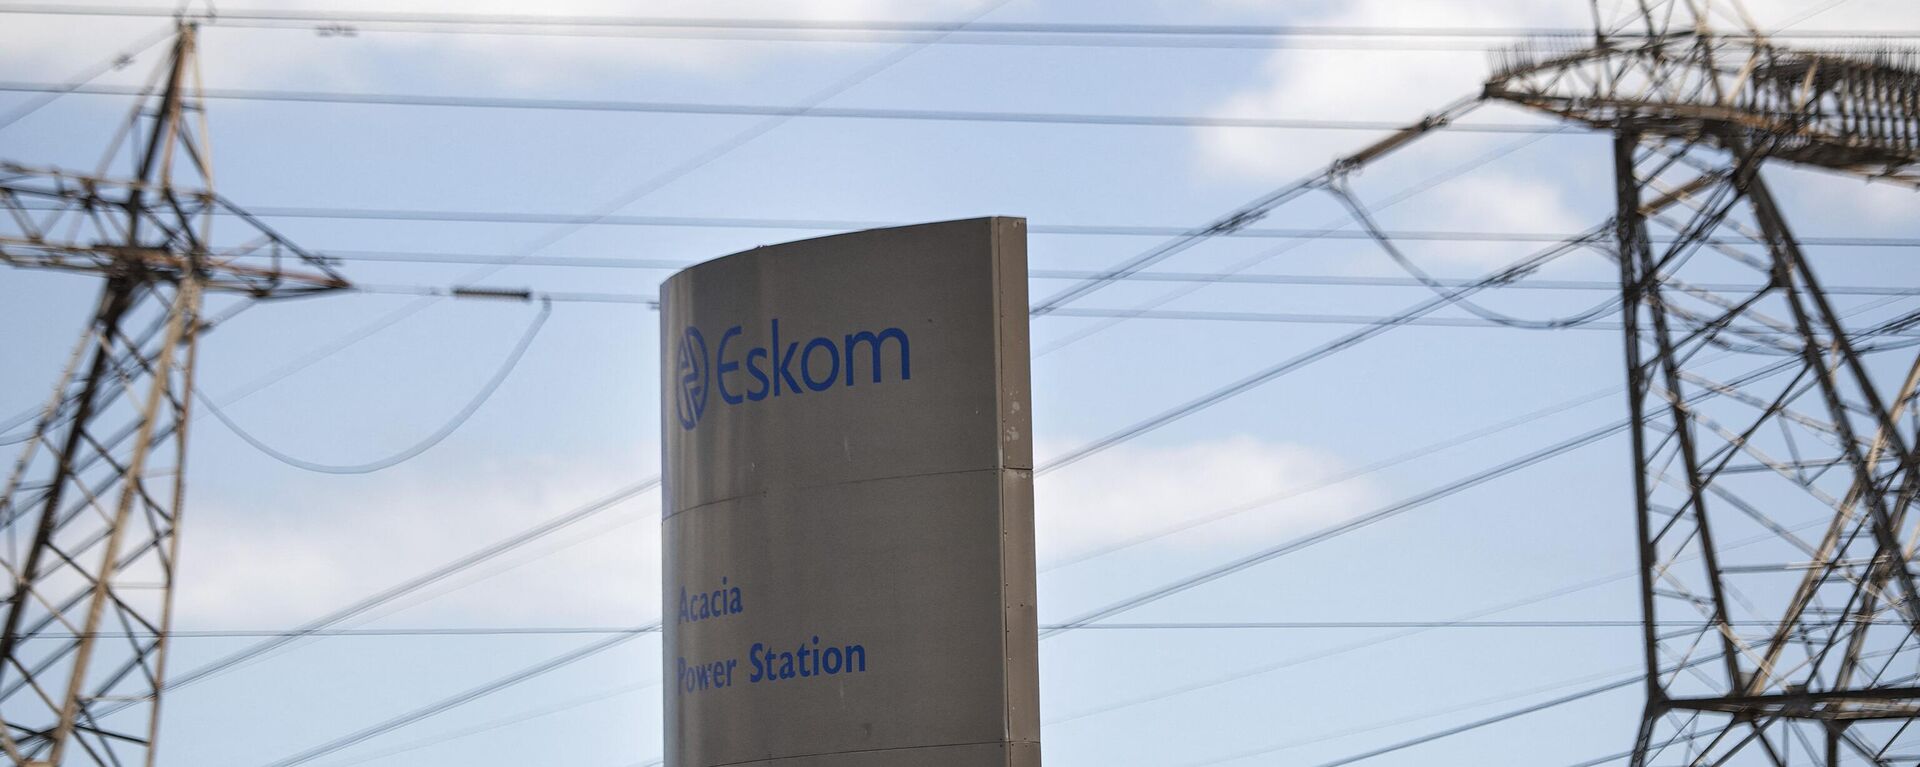 A sign for Eskom, the South African electricity authority, stands next to electricity pylons near Cape Town on January 22, 2023.  - Sputnik International, 1920, 24.02.2023